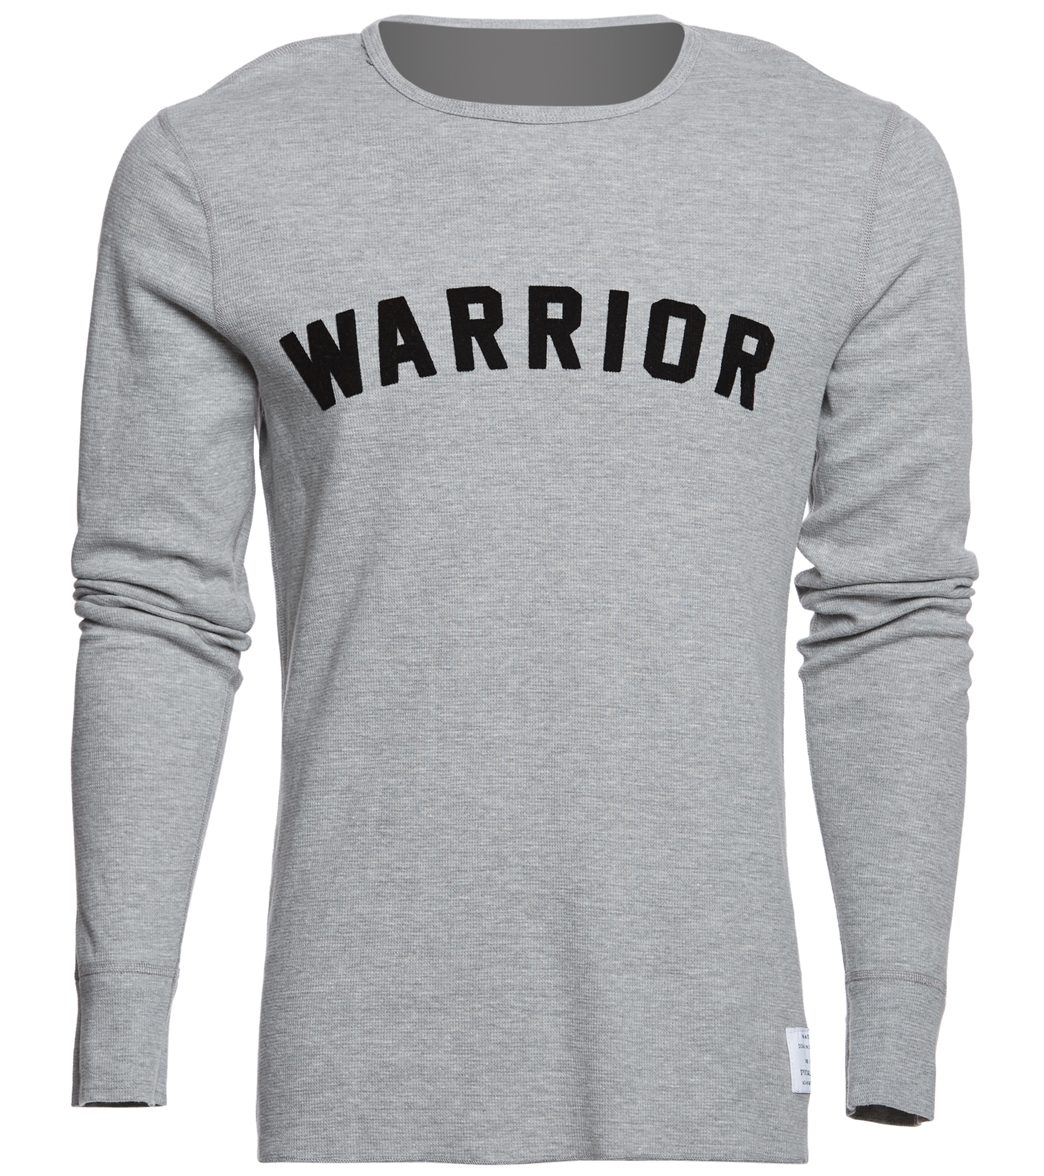 Warrior Practice Jersey Black / White Size S ***Free Shipping***